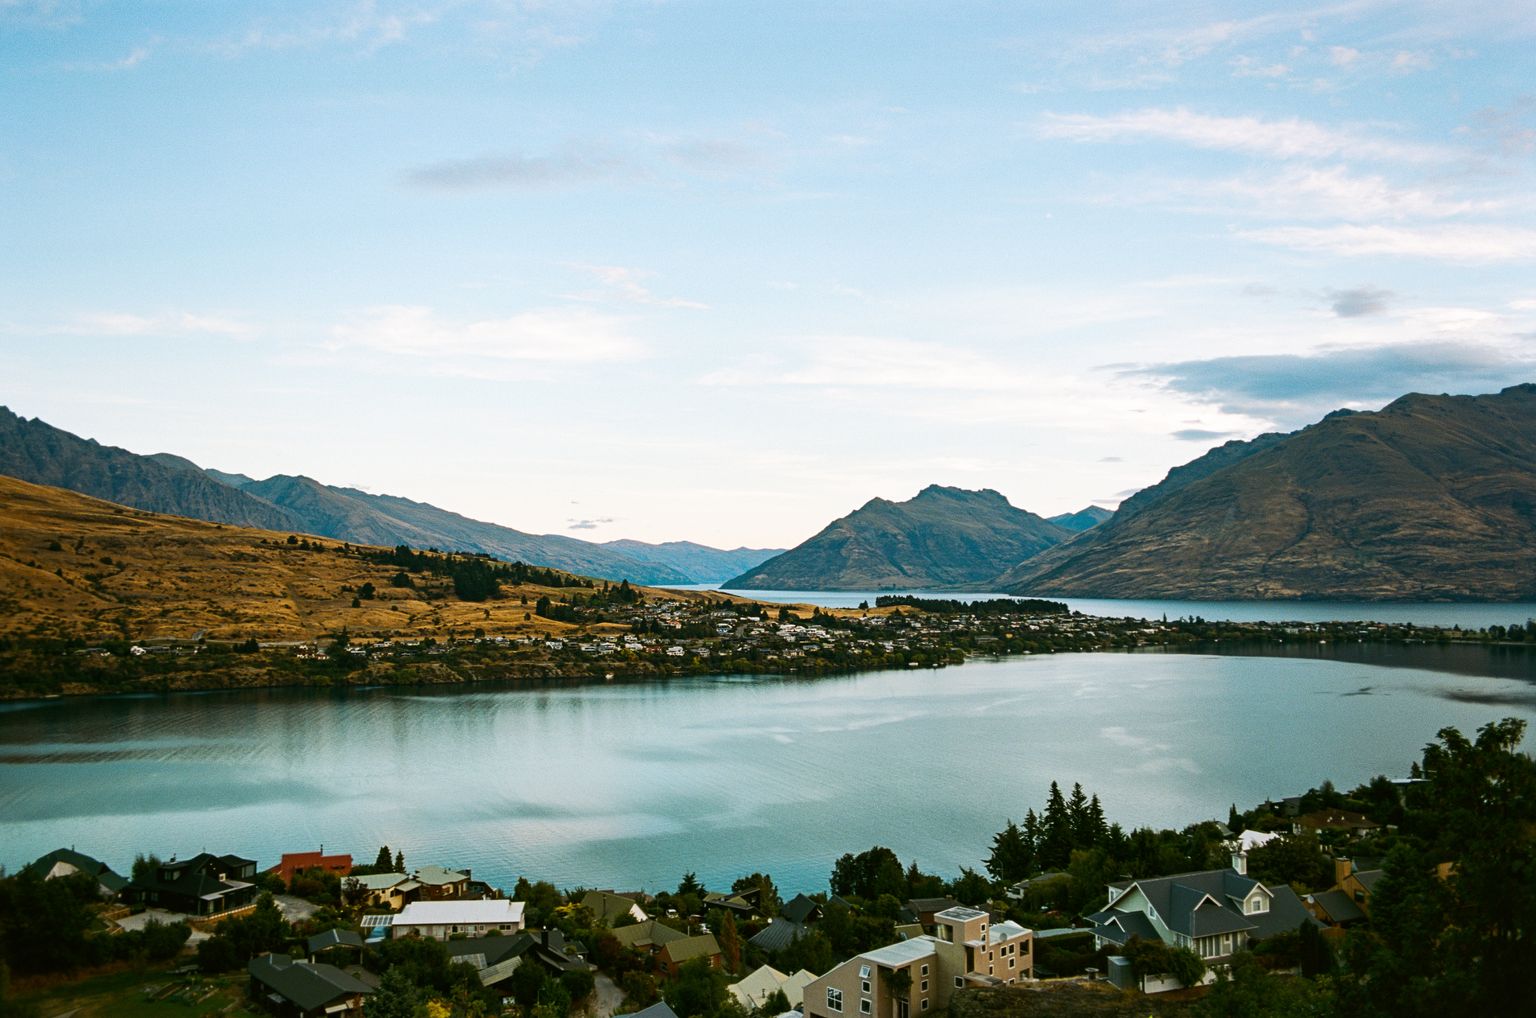 View of Lake Wakatipu surrounded by houses and evergreens with mountains in the distance.